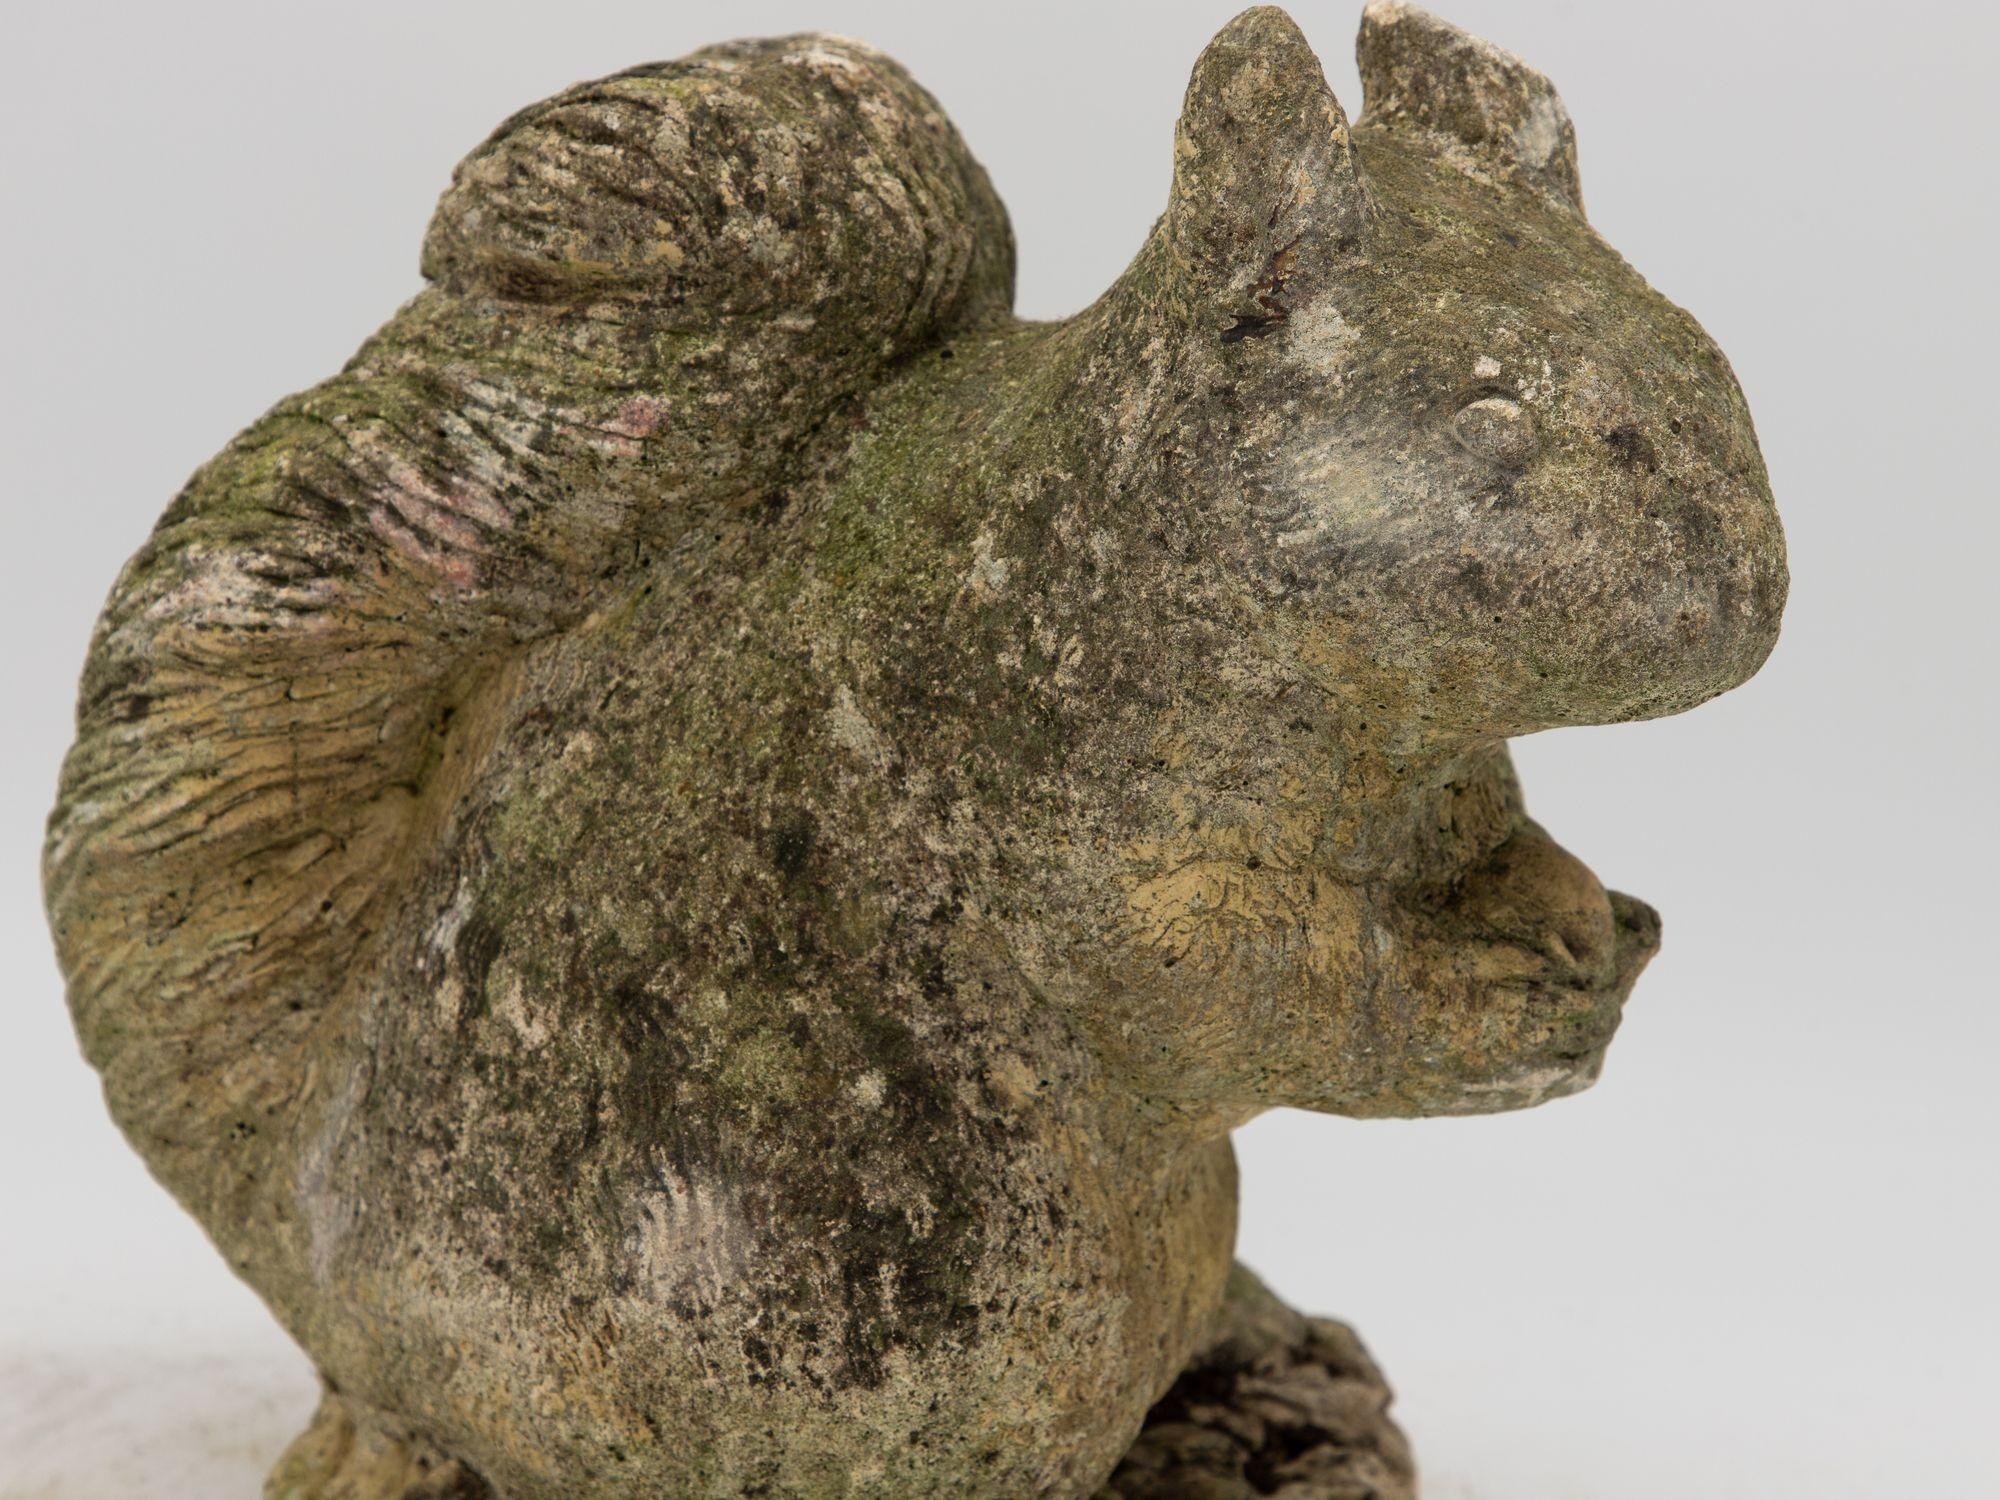 This delightful mid 20th Century concrete squirrel garden ornament is the epitome of outdoor charm. This enchanting piece, meticulously crafted from sturdy concrete, captures the essence of a playful squirrel in lifelike detail. From its curious